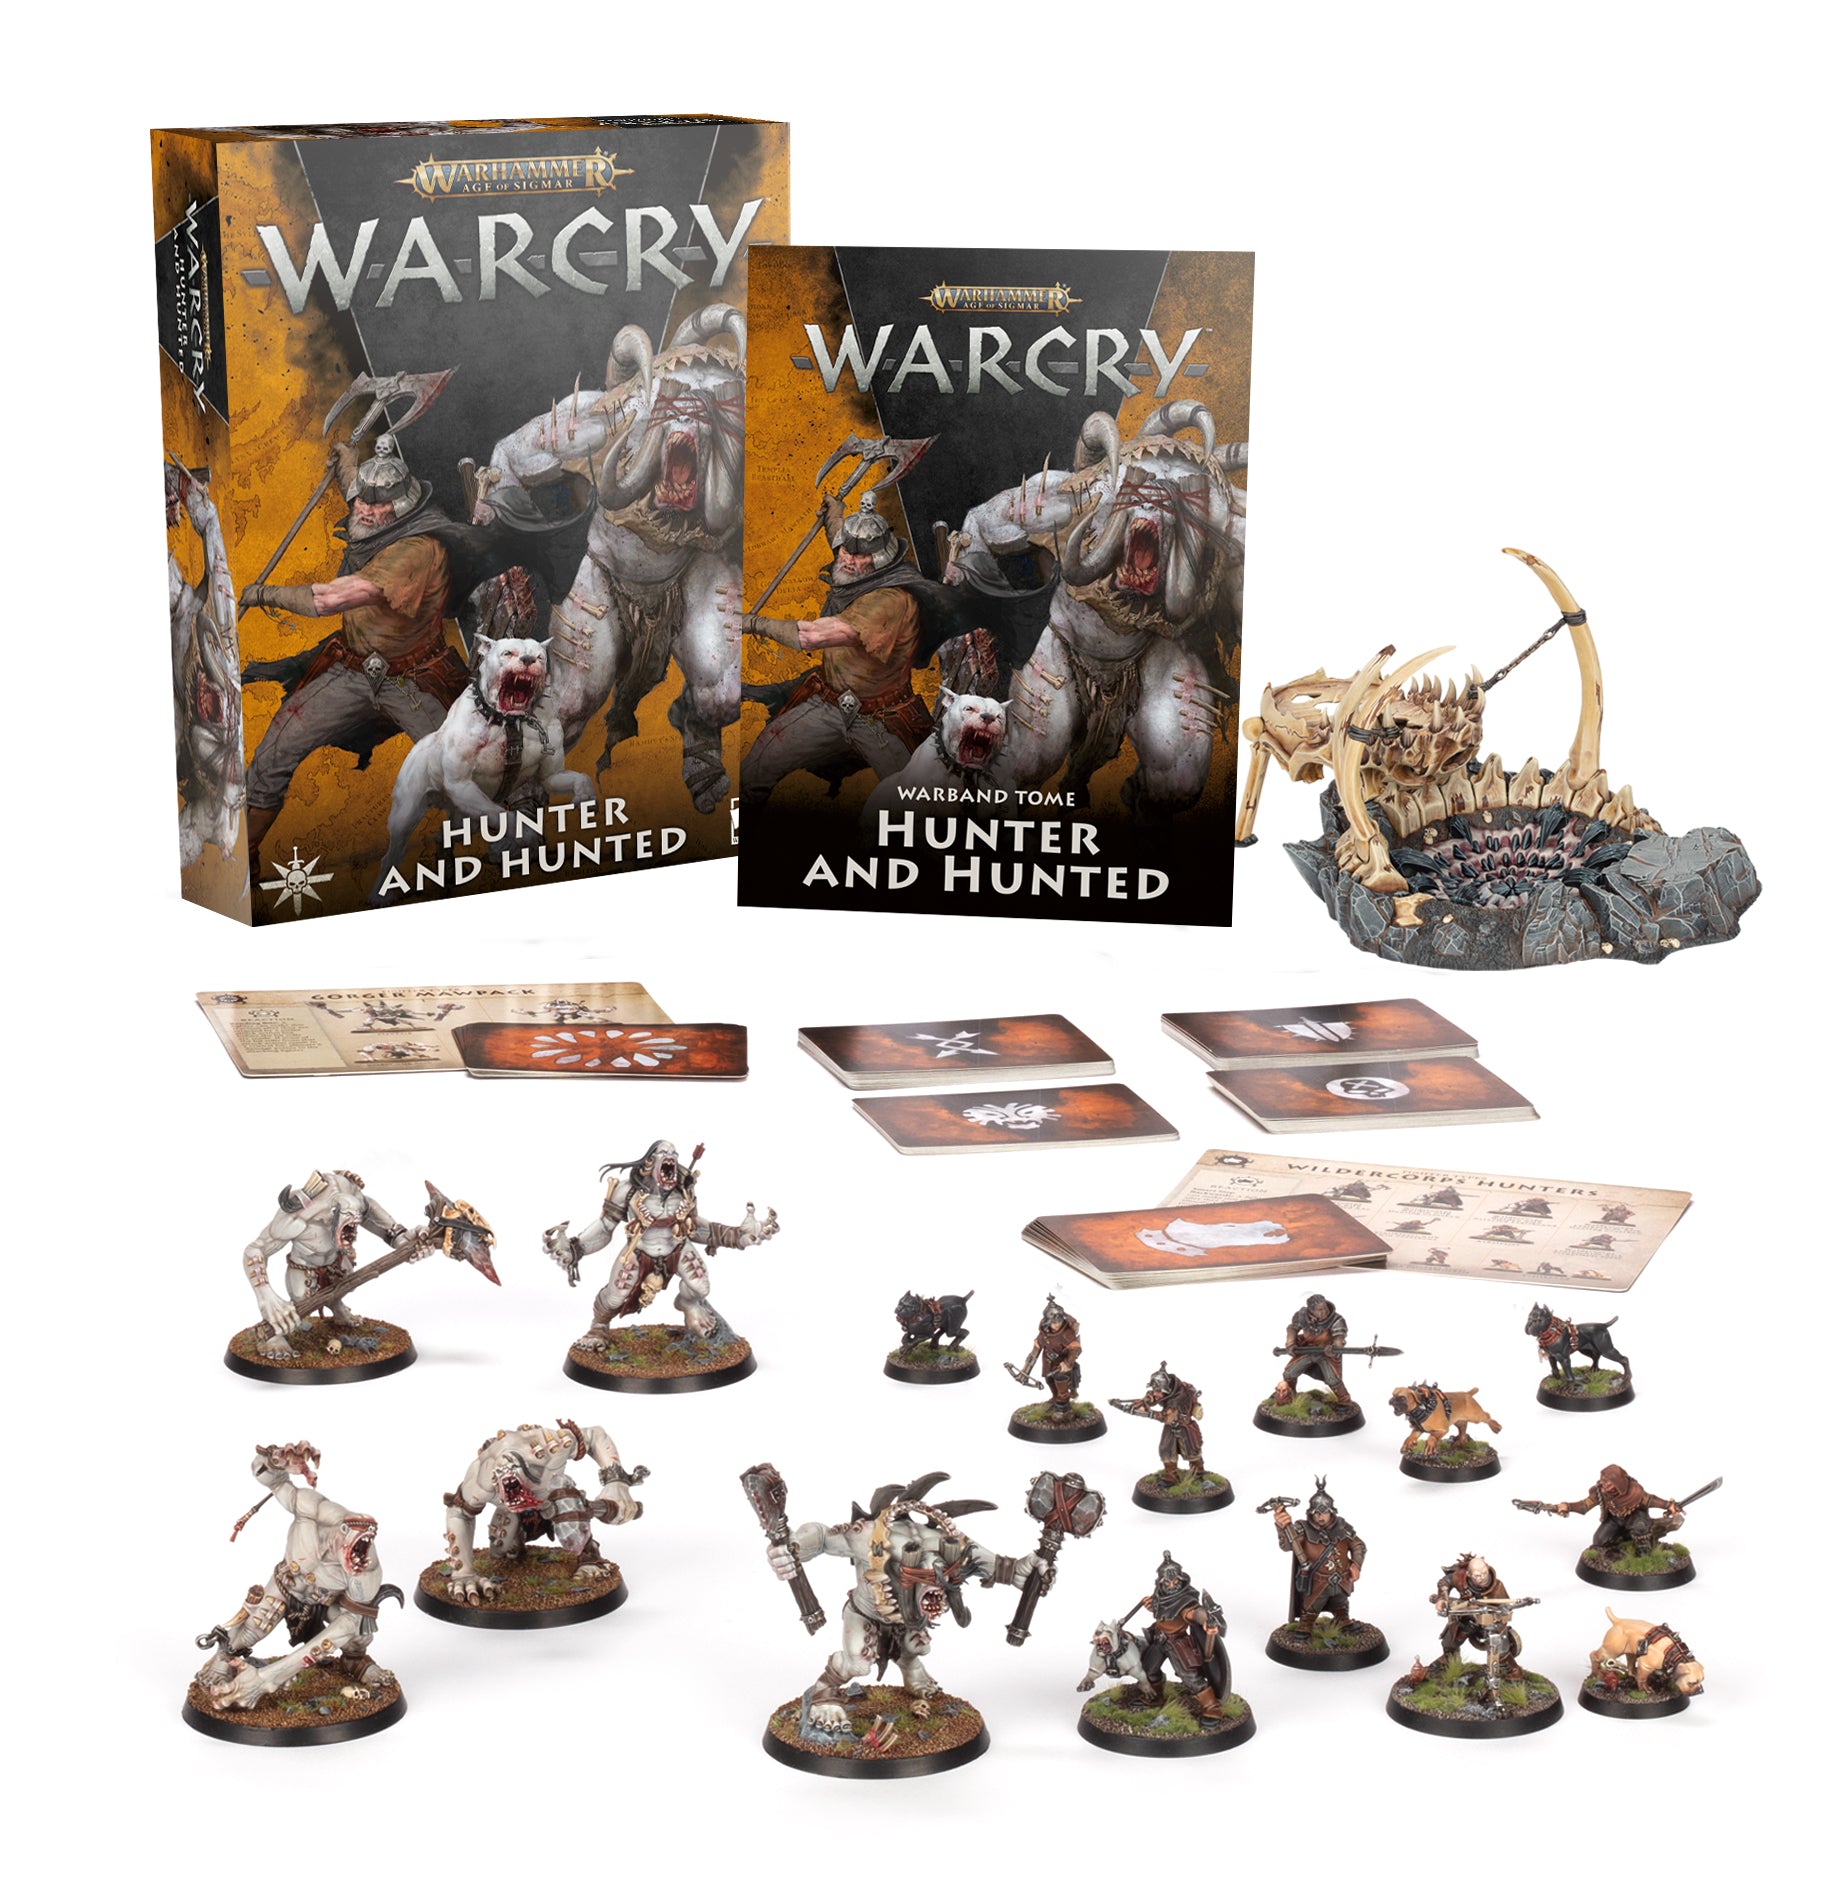 a warhammer board game with a box and figures